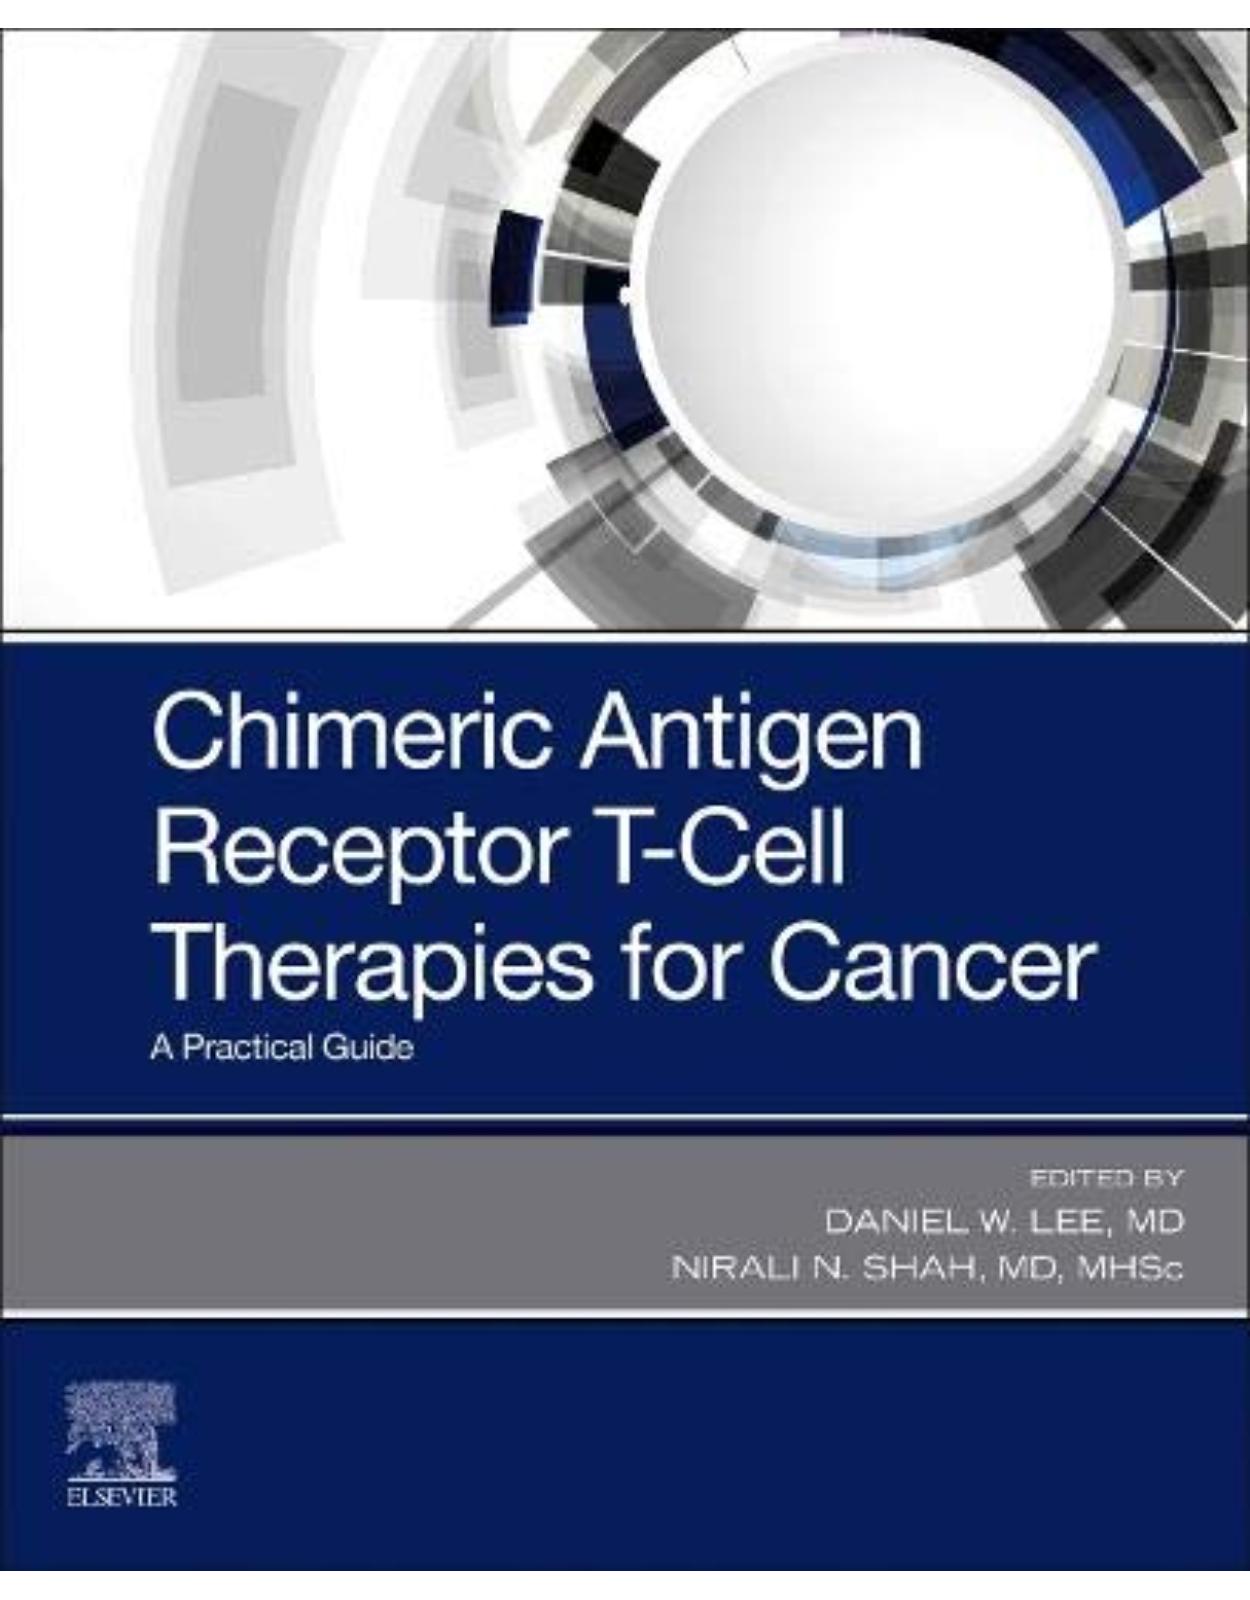 Chimeric Antigen Receptor T-Cell Therapies for Cancer, A Practical Guide